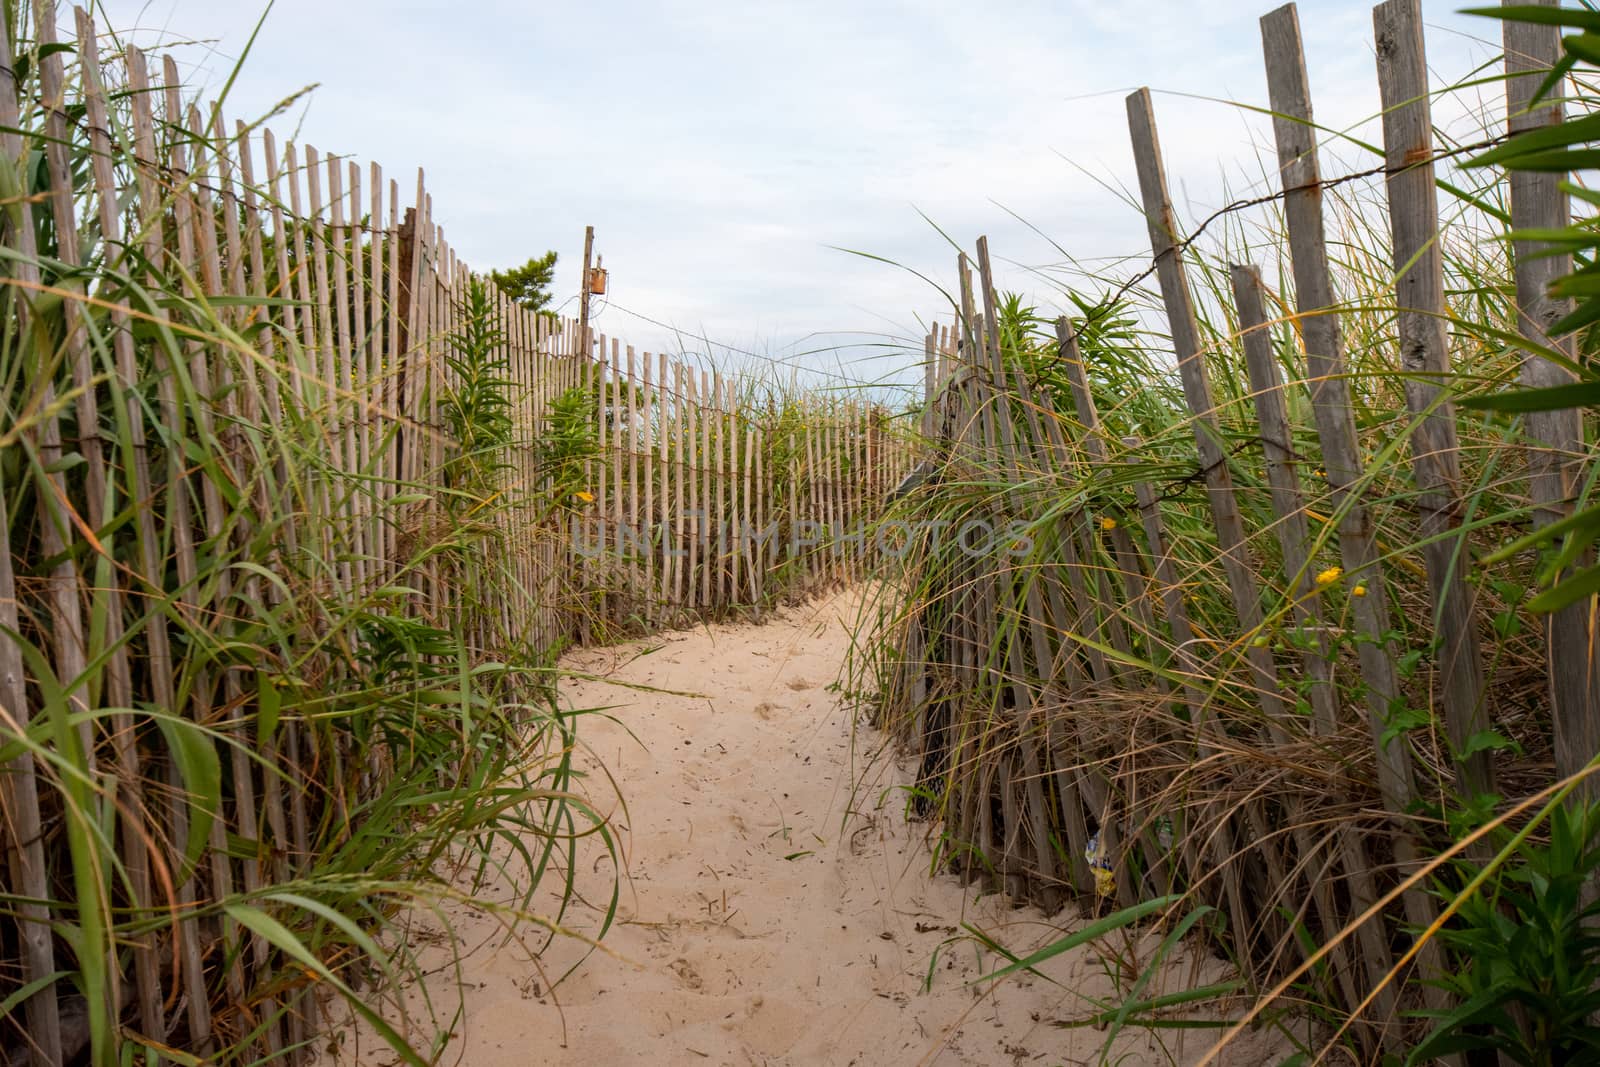 A Sandy Path With An Old Wooden Fence and Overgrown Plants on Ea by bju12290